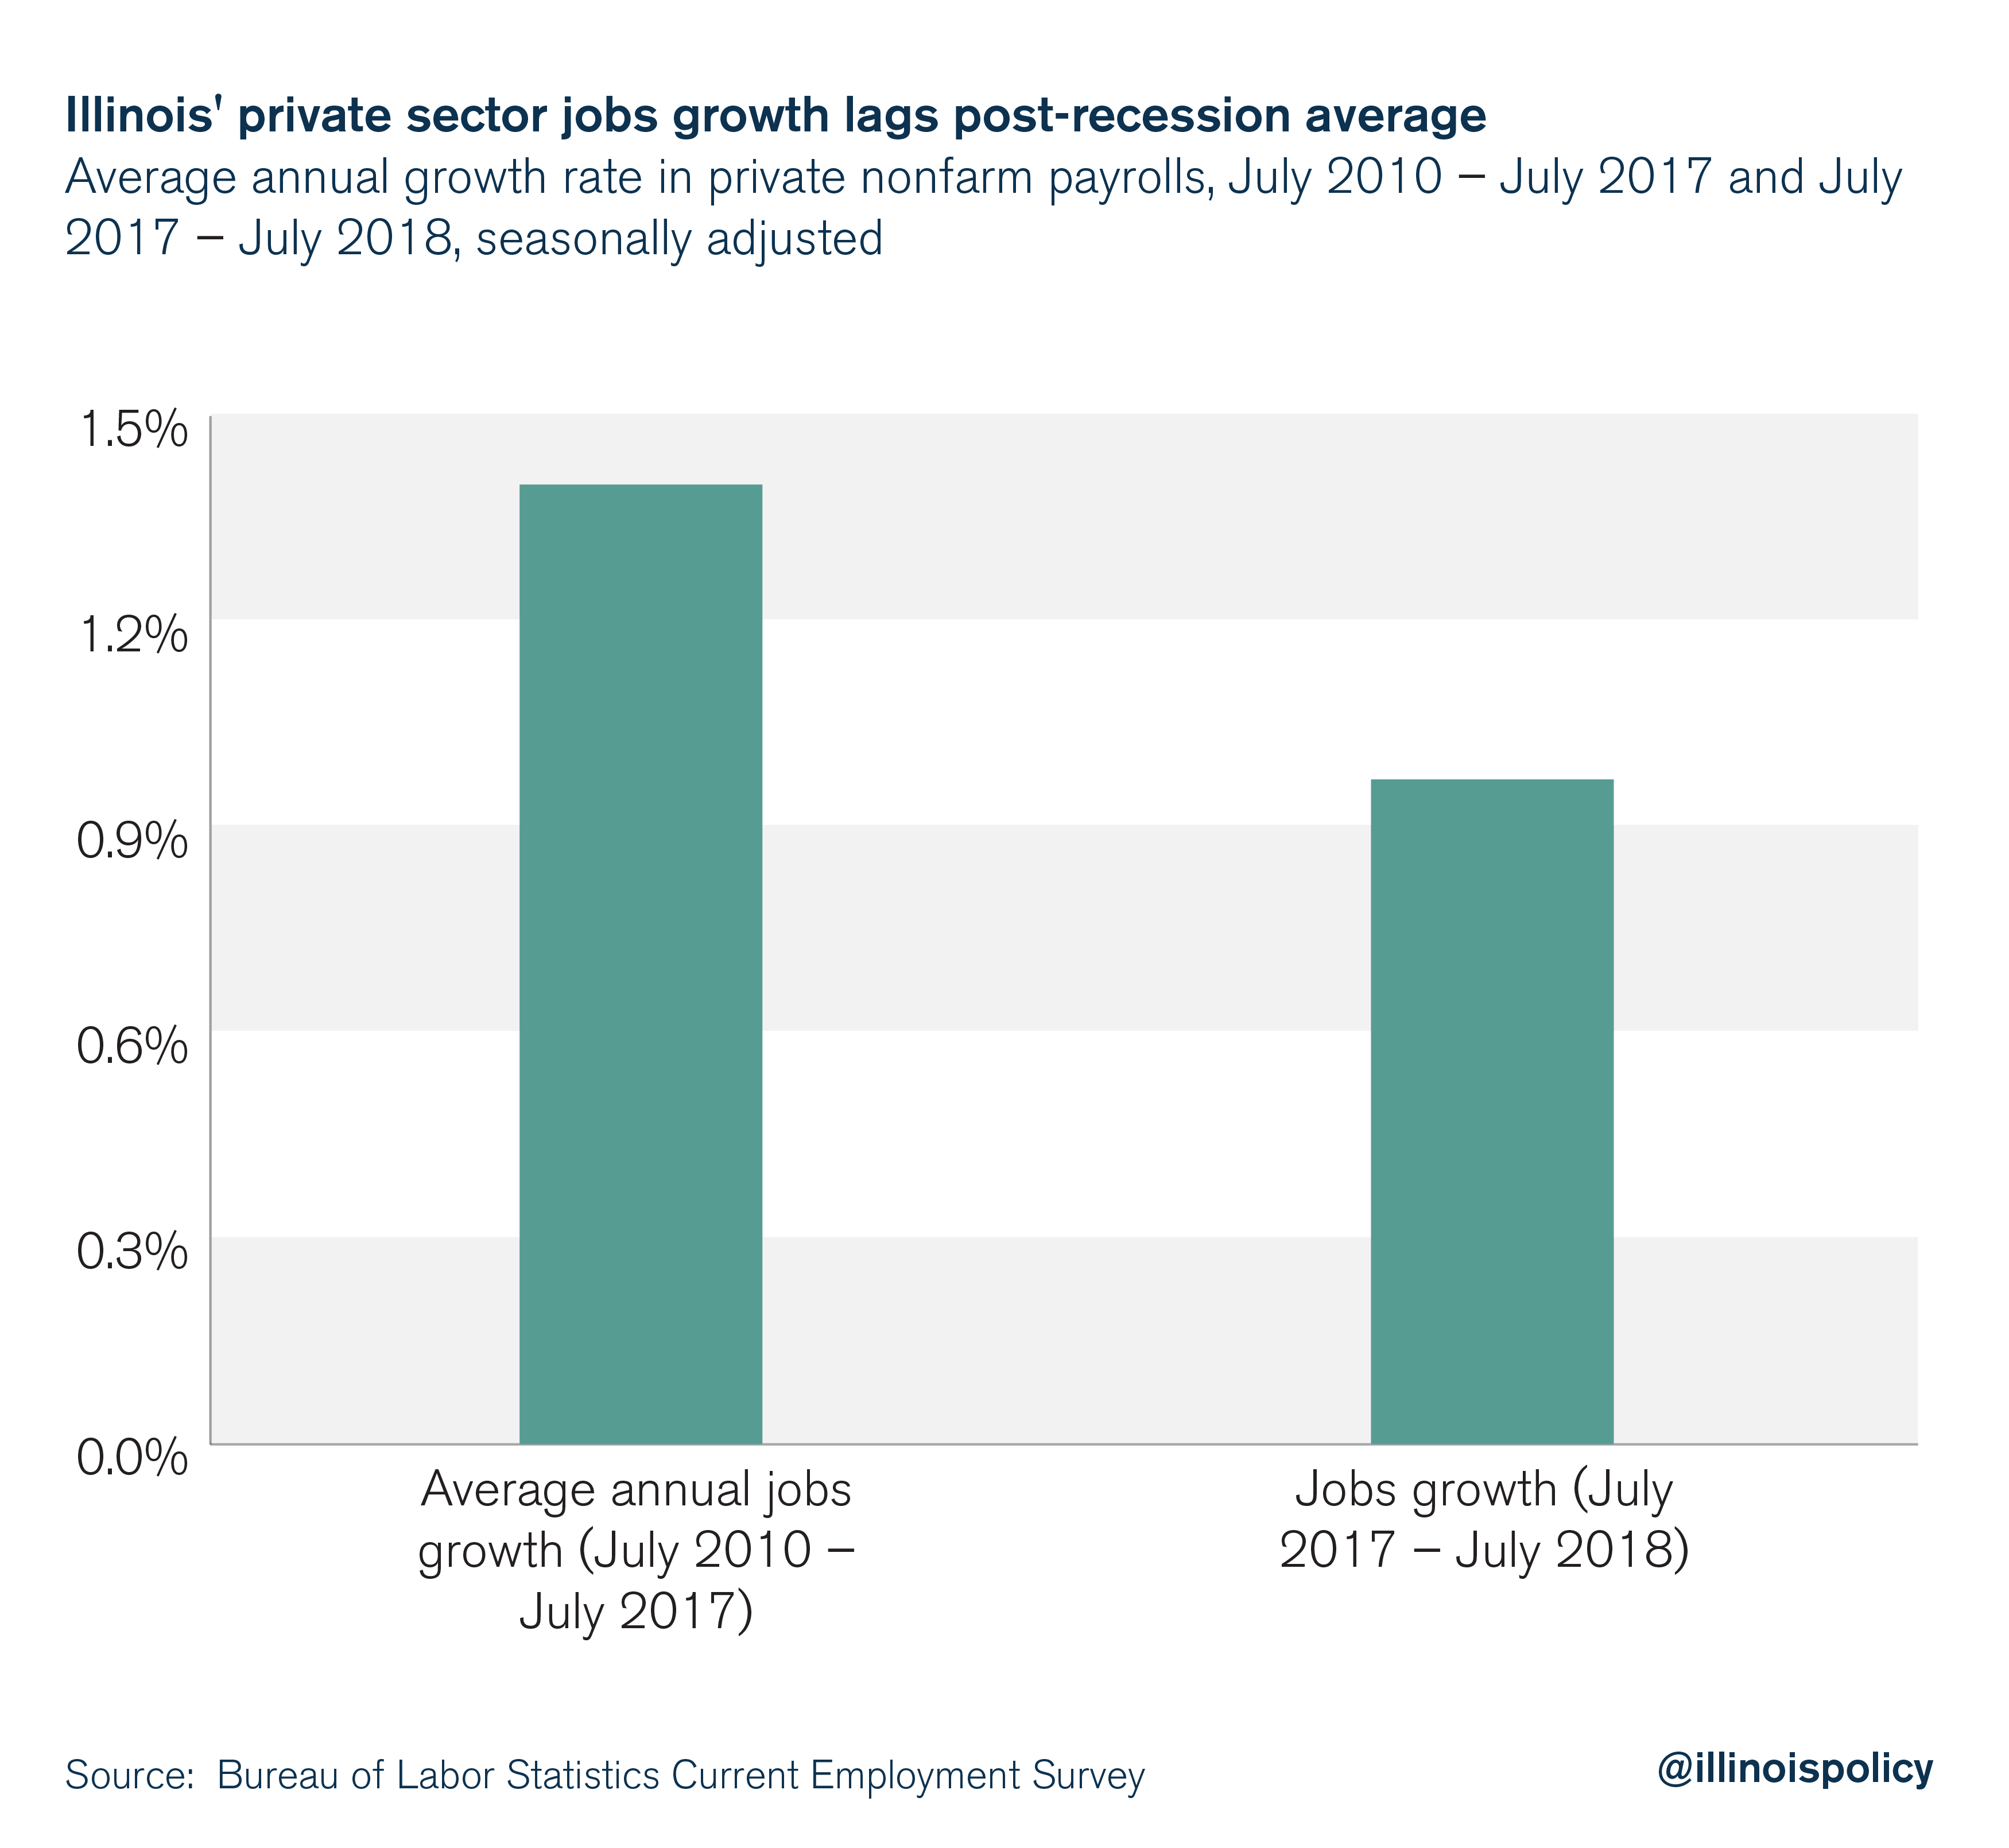 Illinois' private sector job growth lags post-recession average